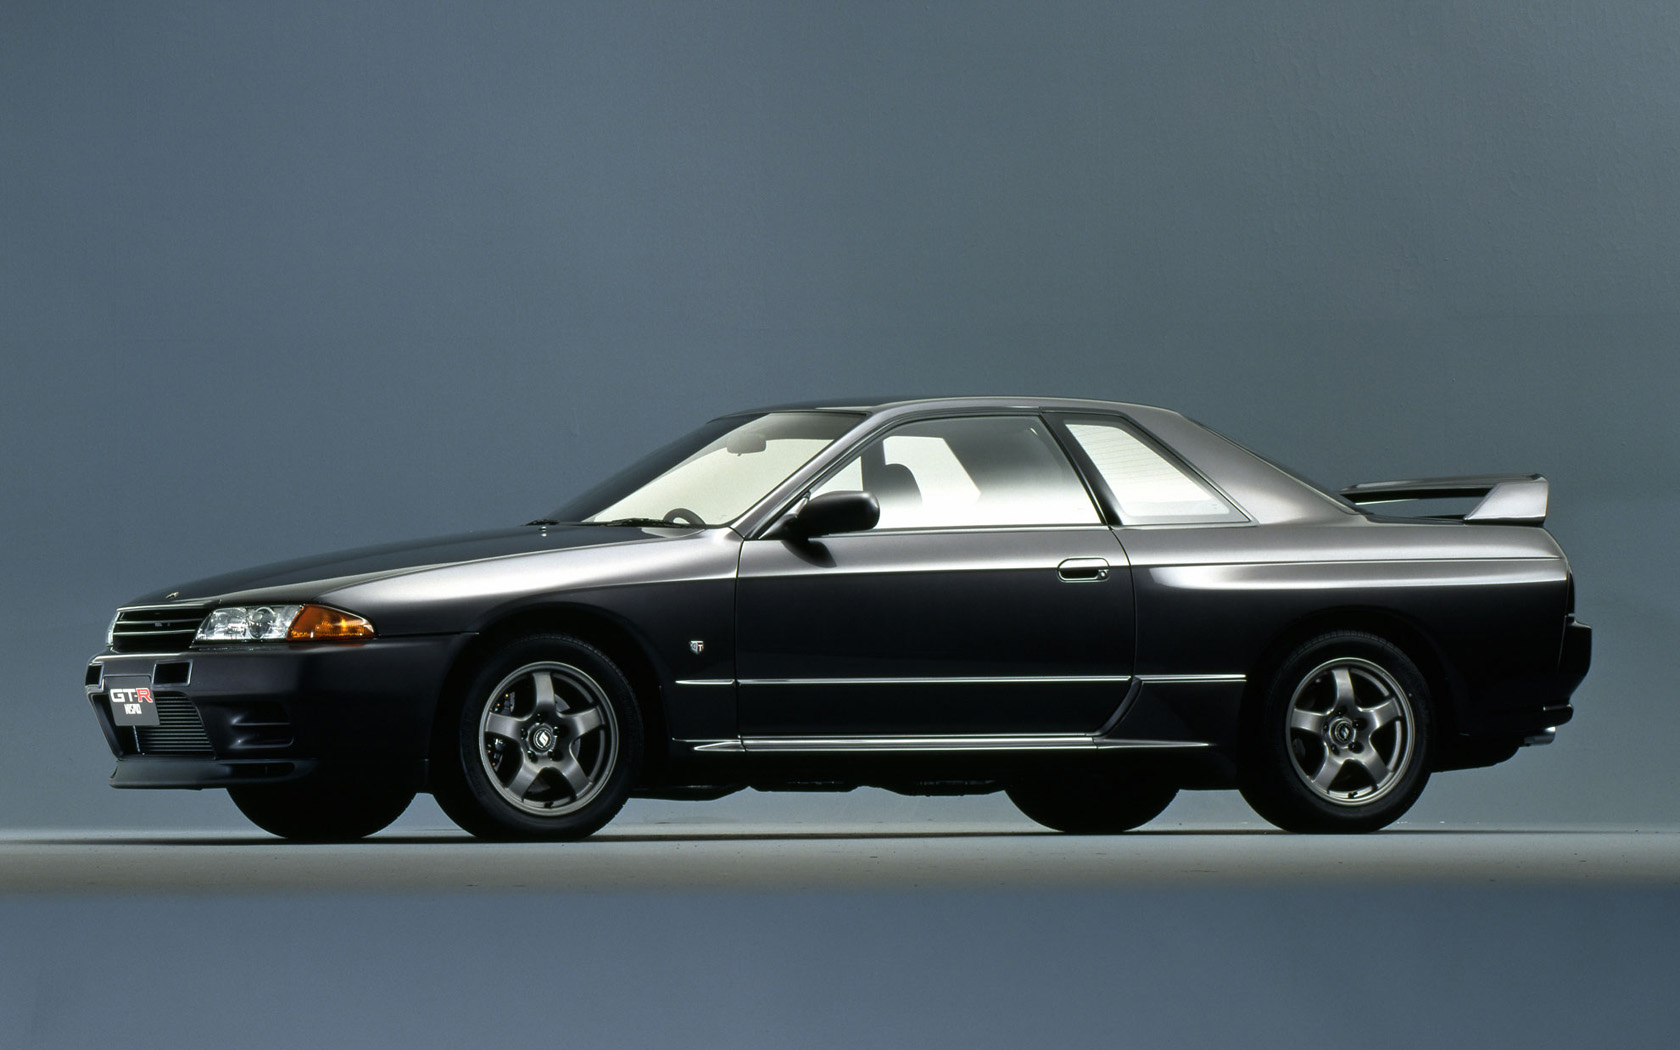 Nissan Skyline R32 Wallpaper Image Pictures Becuo